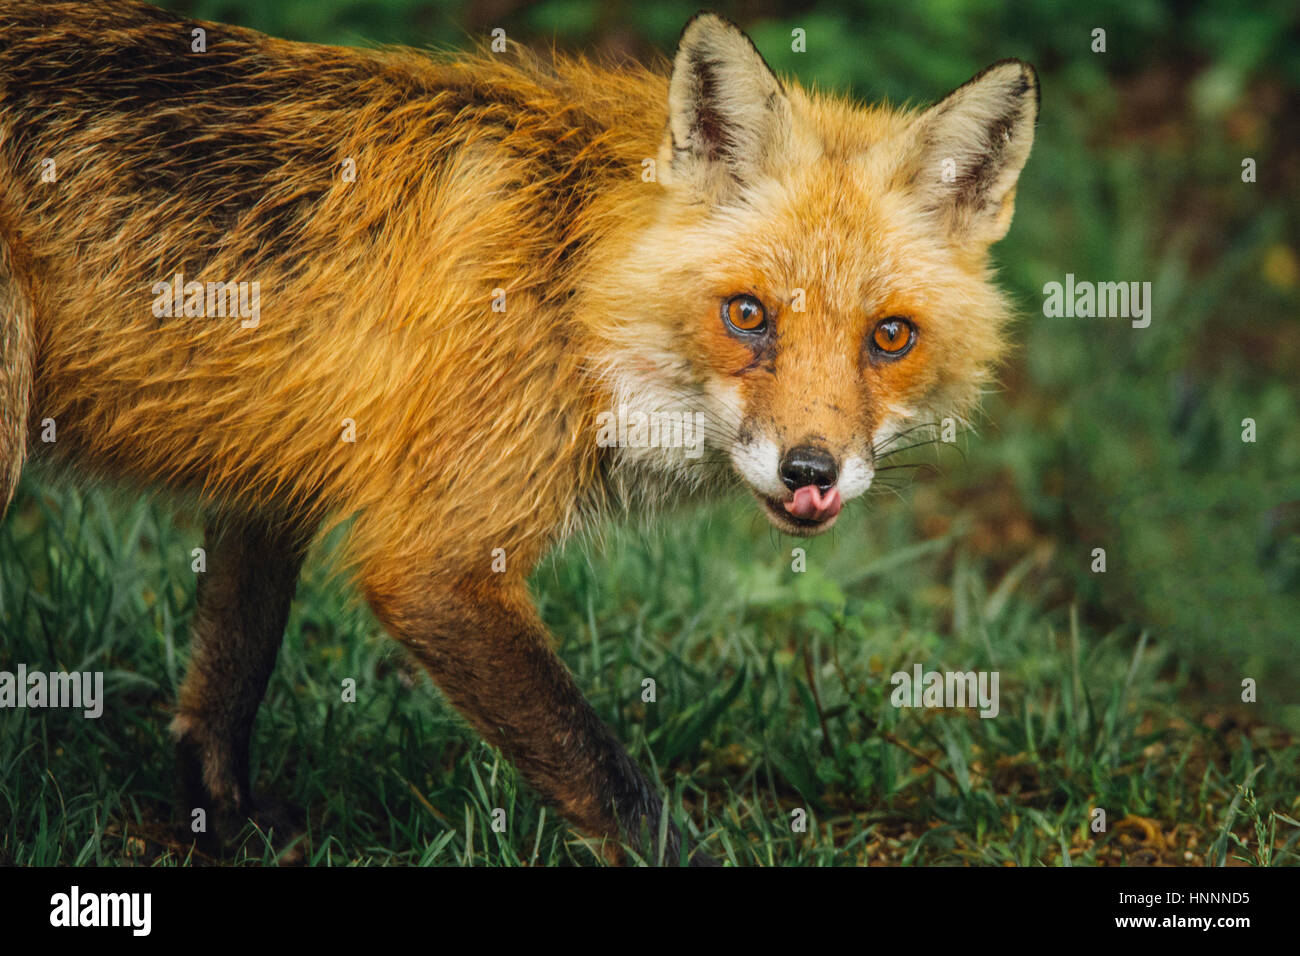 Portrait of red fox sticking out tongue while walking grassy field Stock Photo